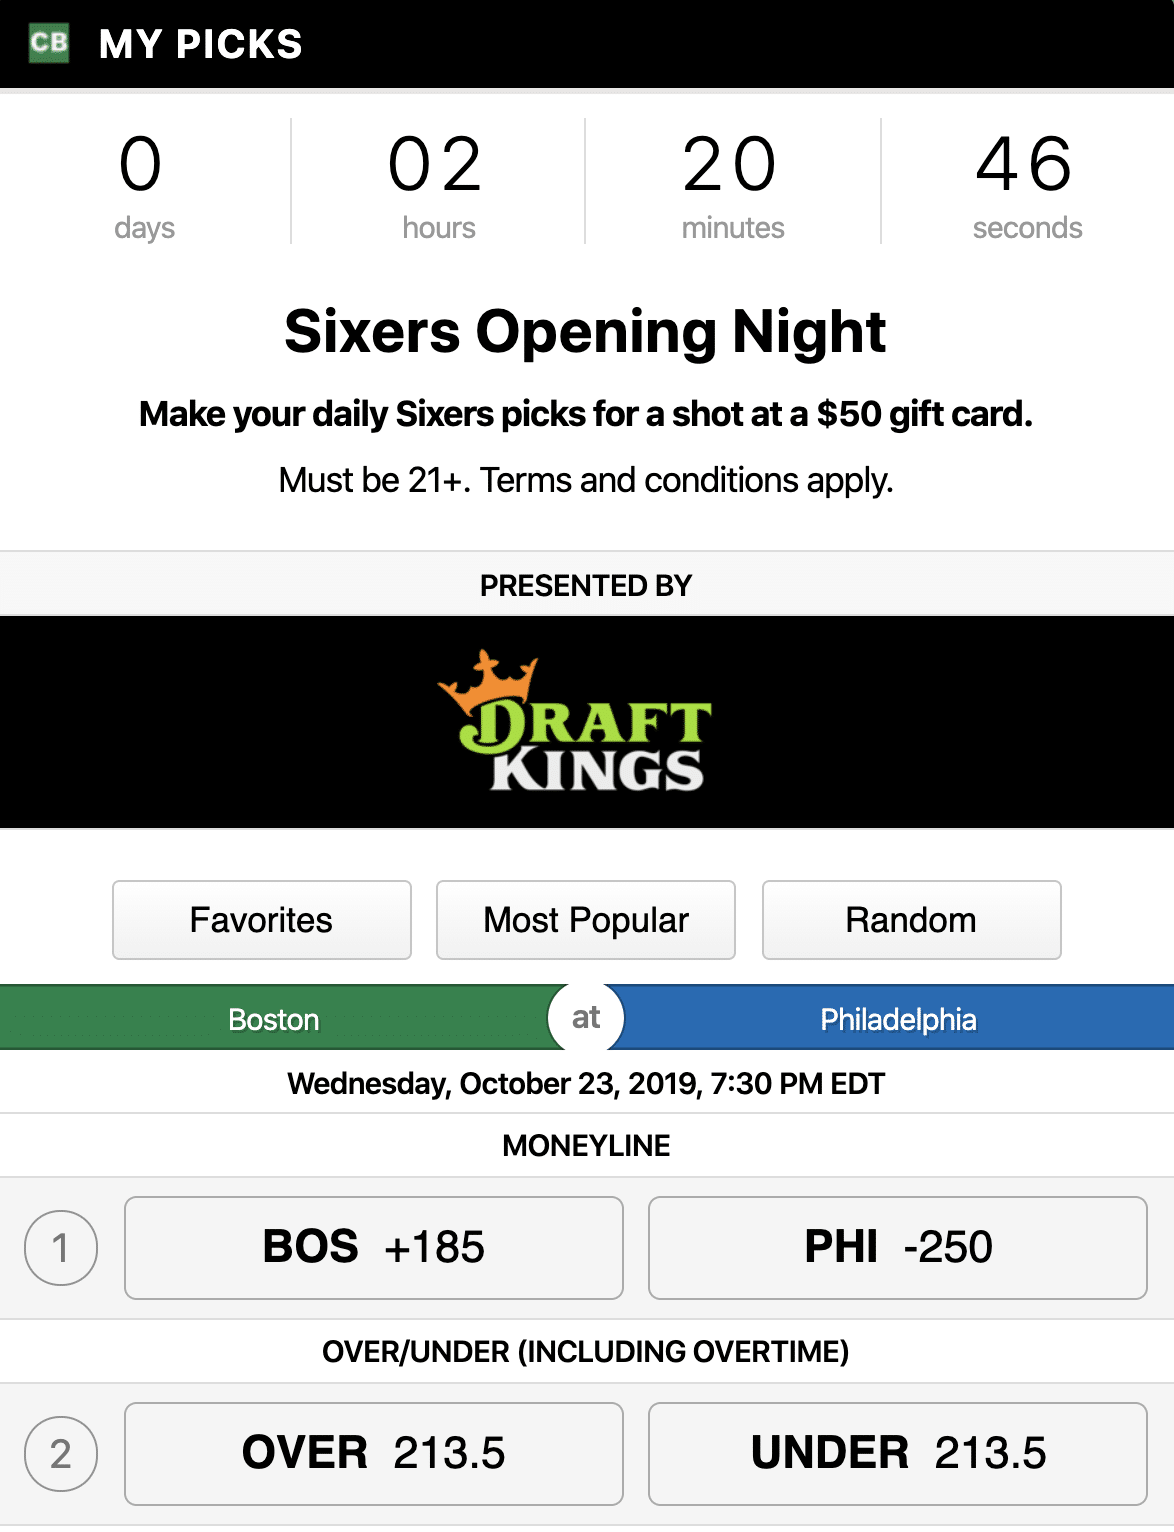 Will Ben Simmons Hit a Three Tonight? Sign Up for Our Free Sixers/Celtics Game!